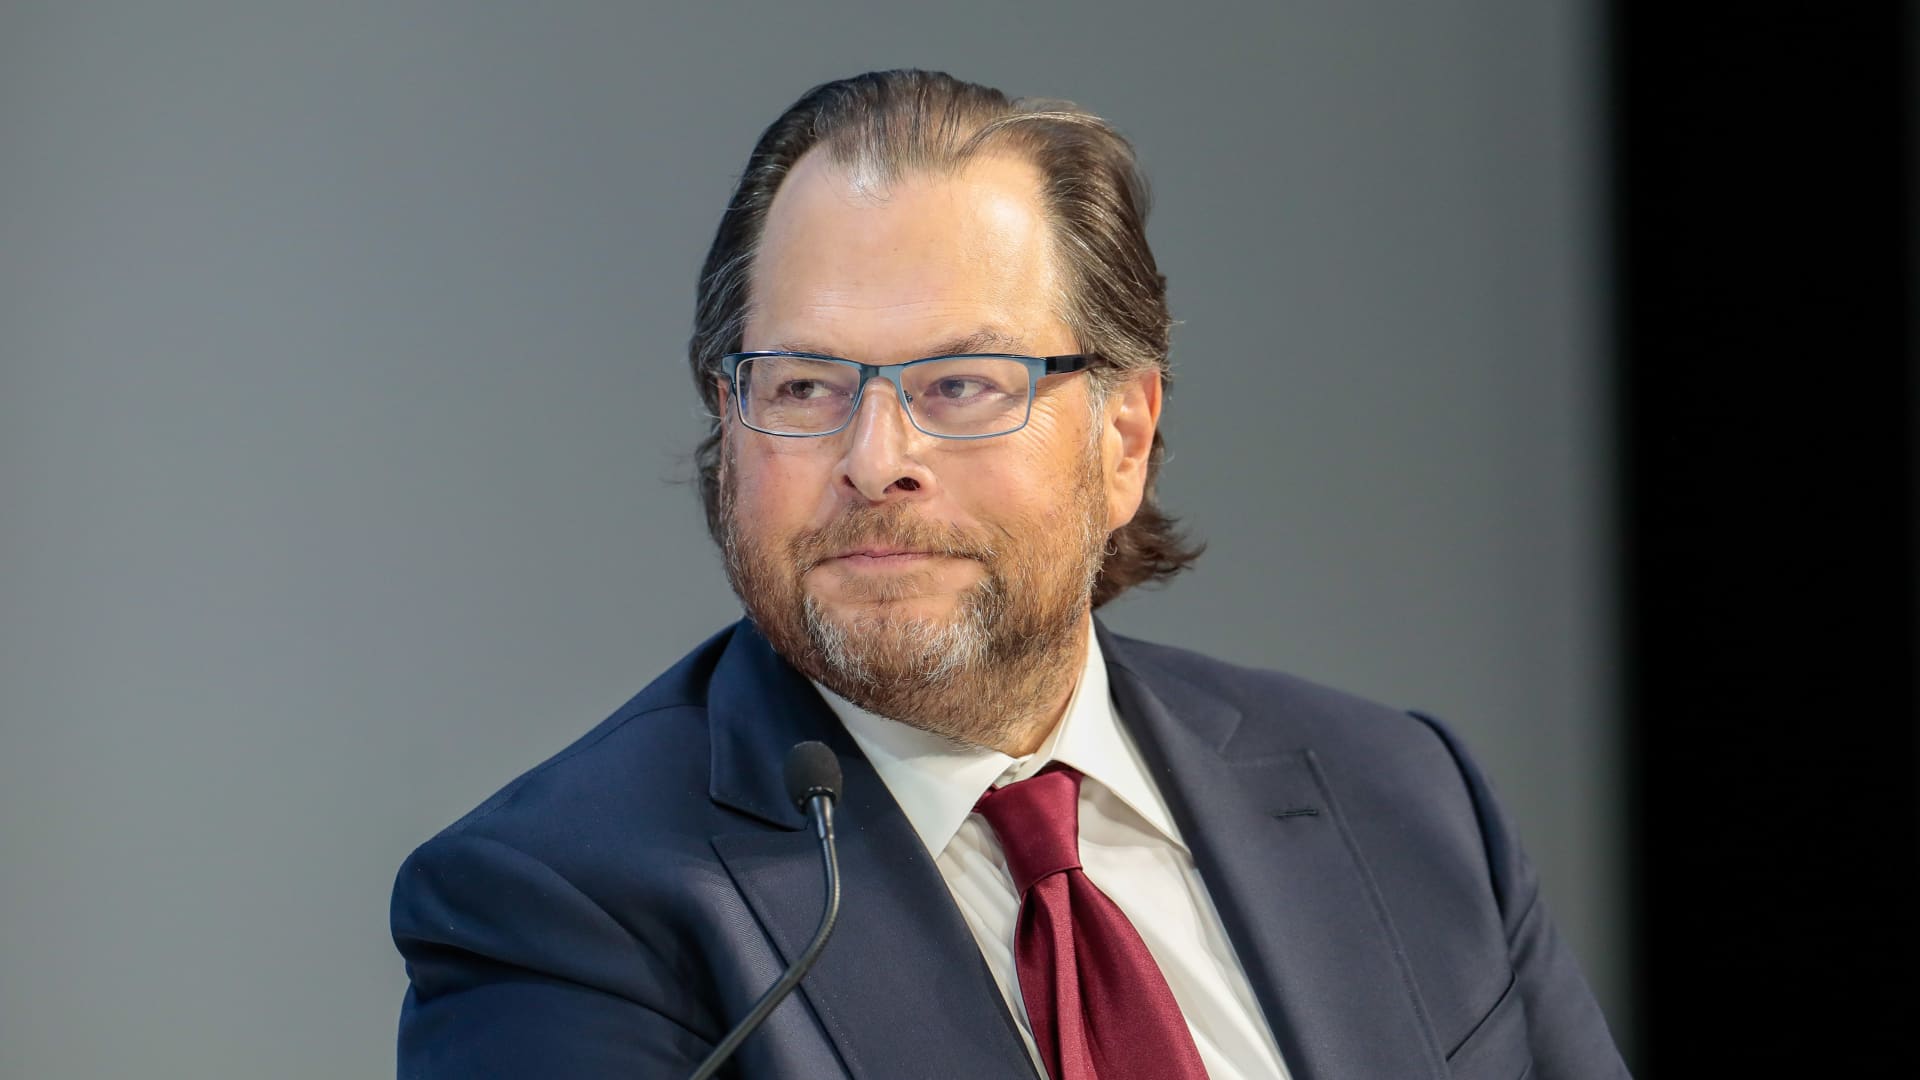 Salesforce CEO Marc Benioff says foreign exchange pushed the company to lower revenue guidance